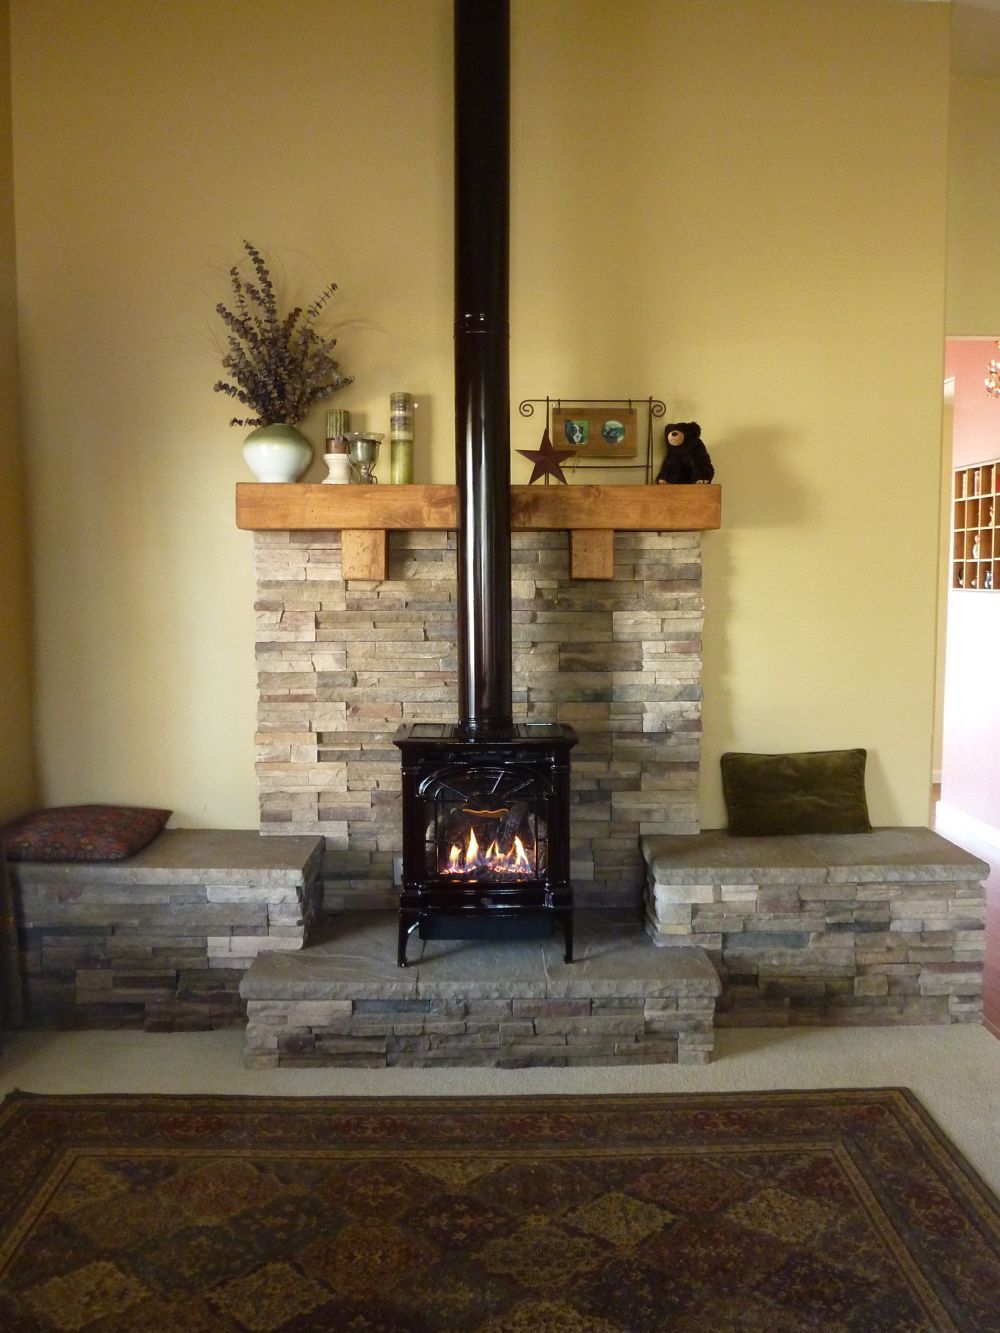 Freestanding Corner Fireplace Elegant Propane Fireplace We Had This Hearth Built to Give More